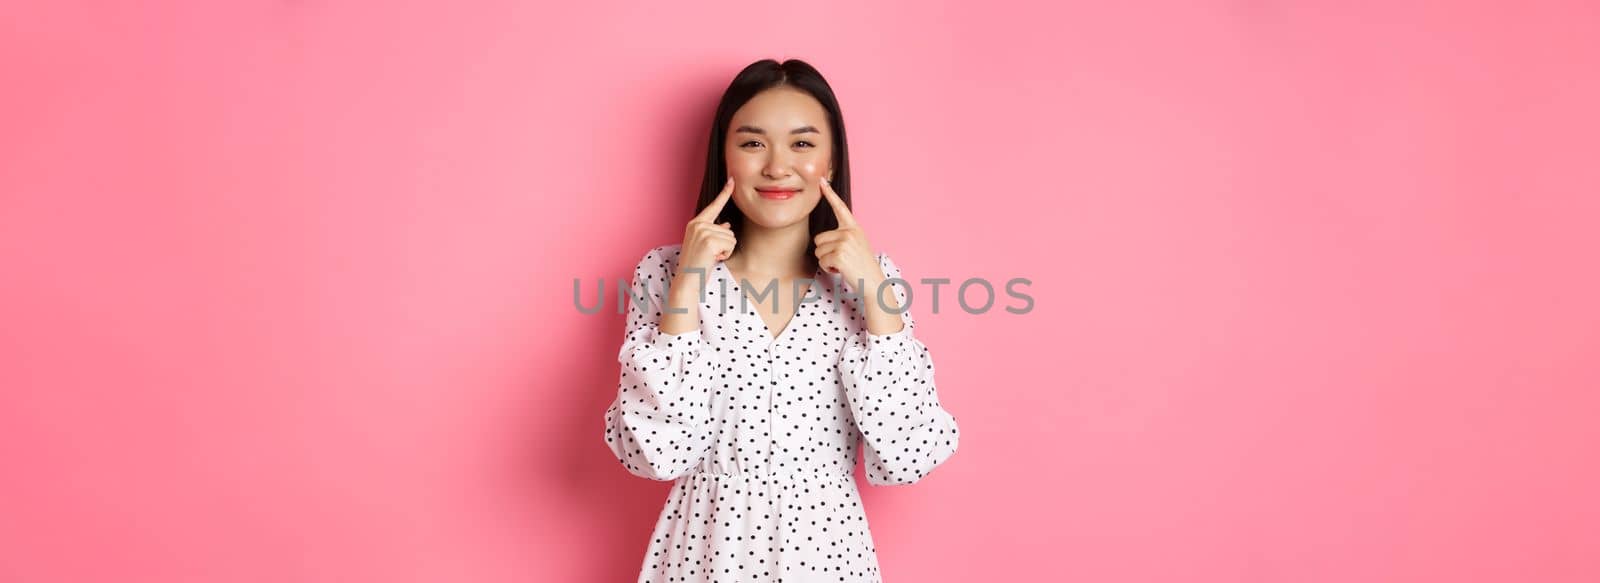 Cute blushing asian girl poking cheeks, smiling happy at camera, wearing romantic white dress, standing over pink background.